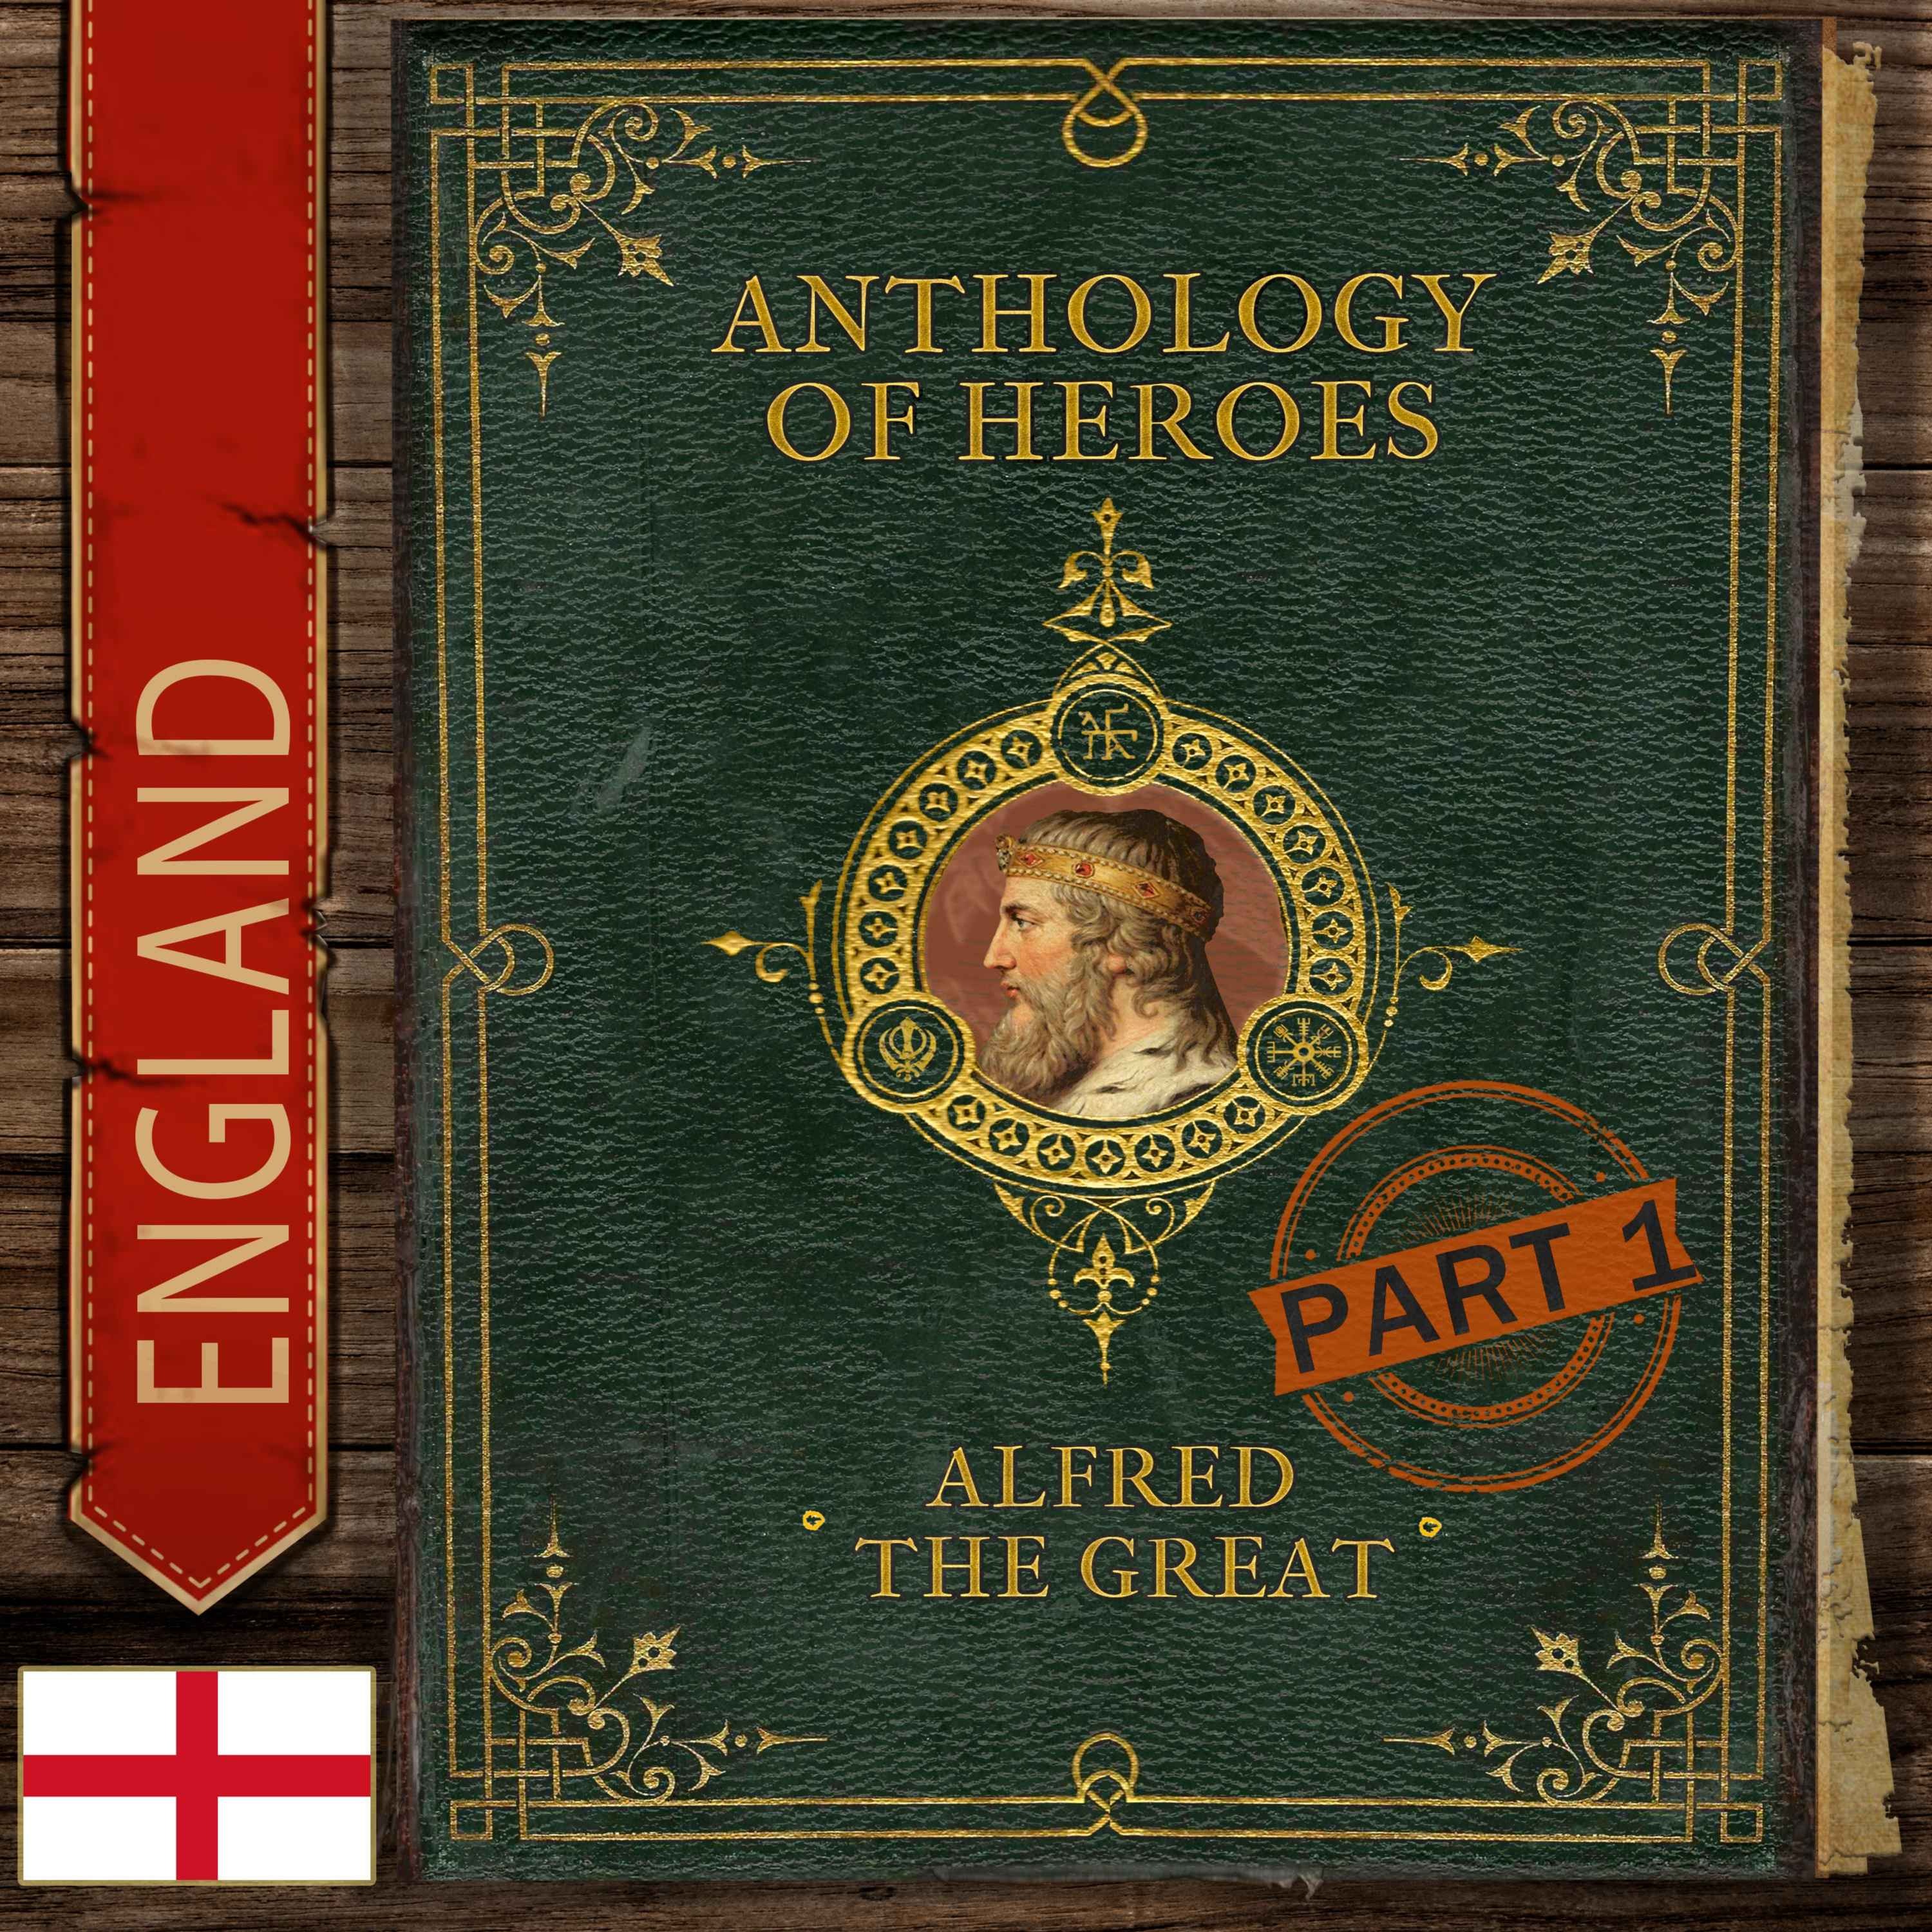 Alfred The Great And The Last Kingdom (Part 1) Image